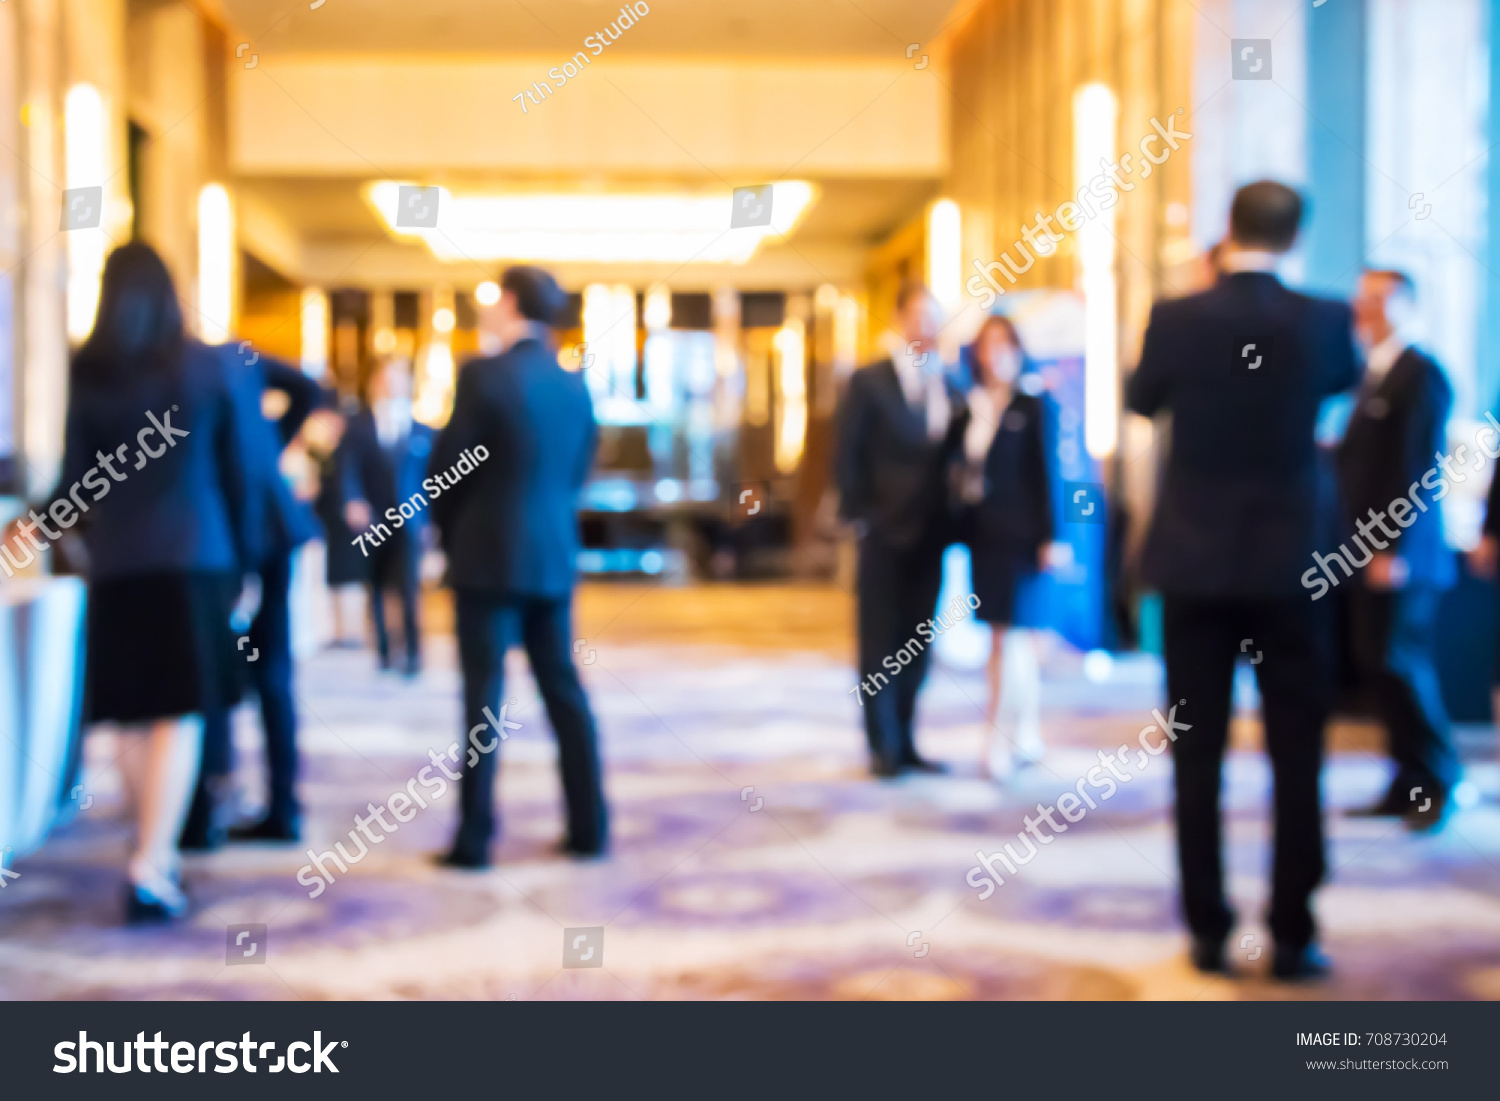 Abstract blur group of people in business meeting, professional corporate event #708730204